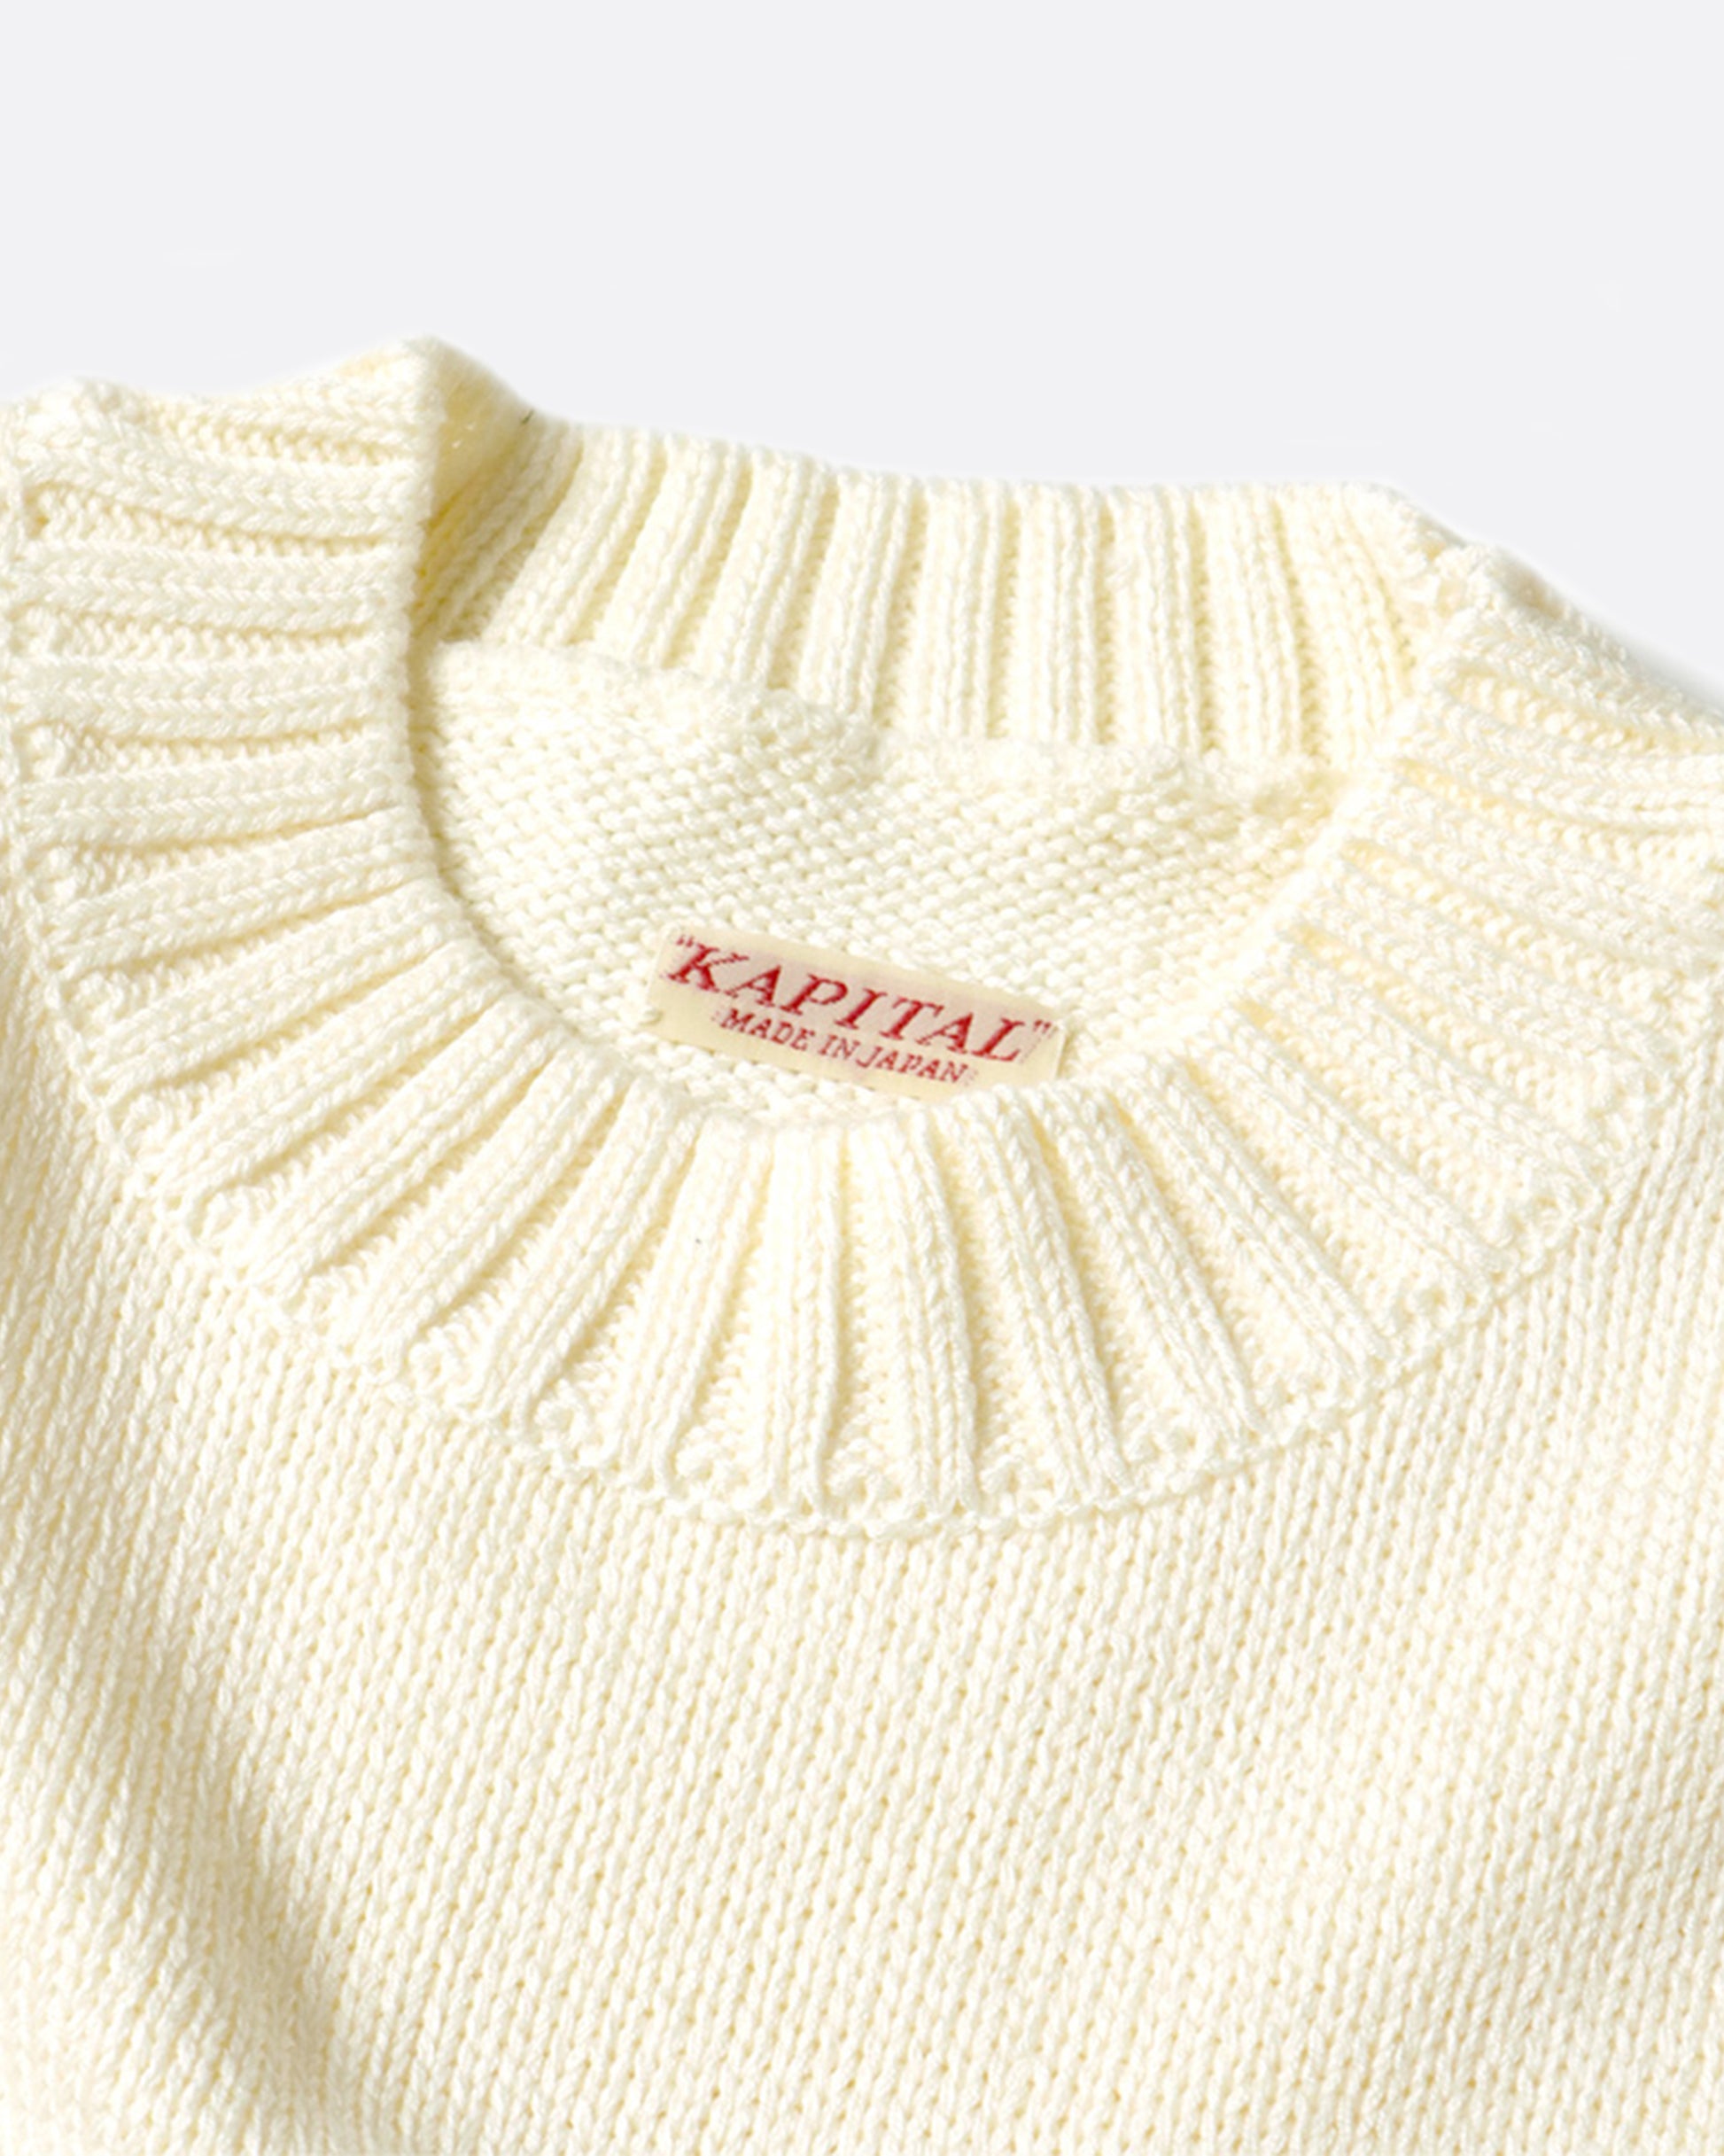 A 5g knit crewneck sweater with a rainbow stripe and smiley elbow patches